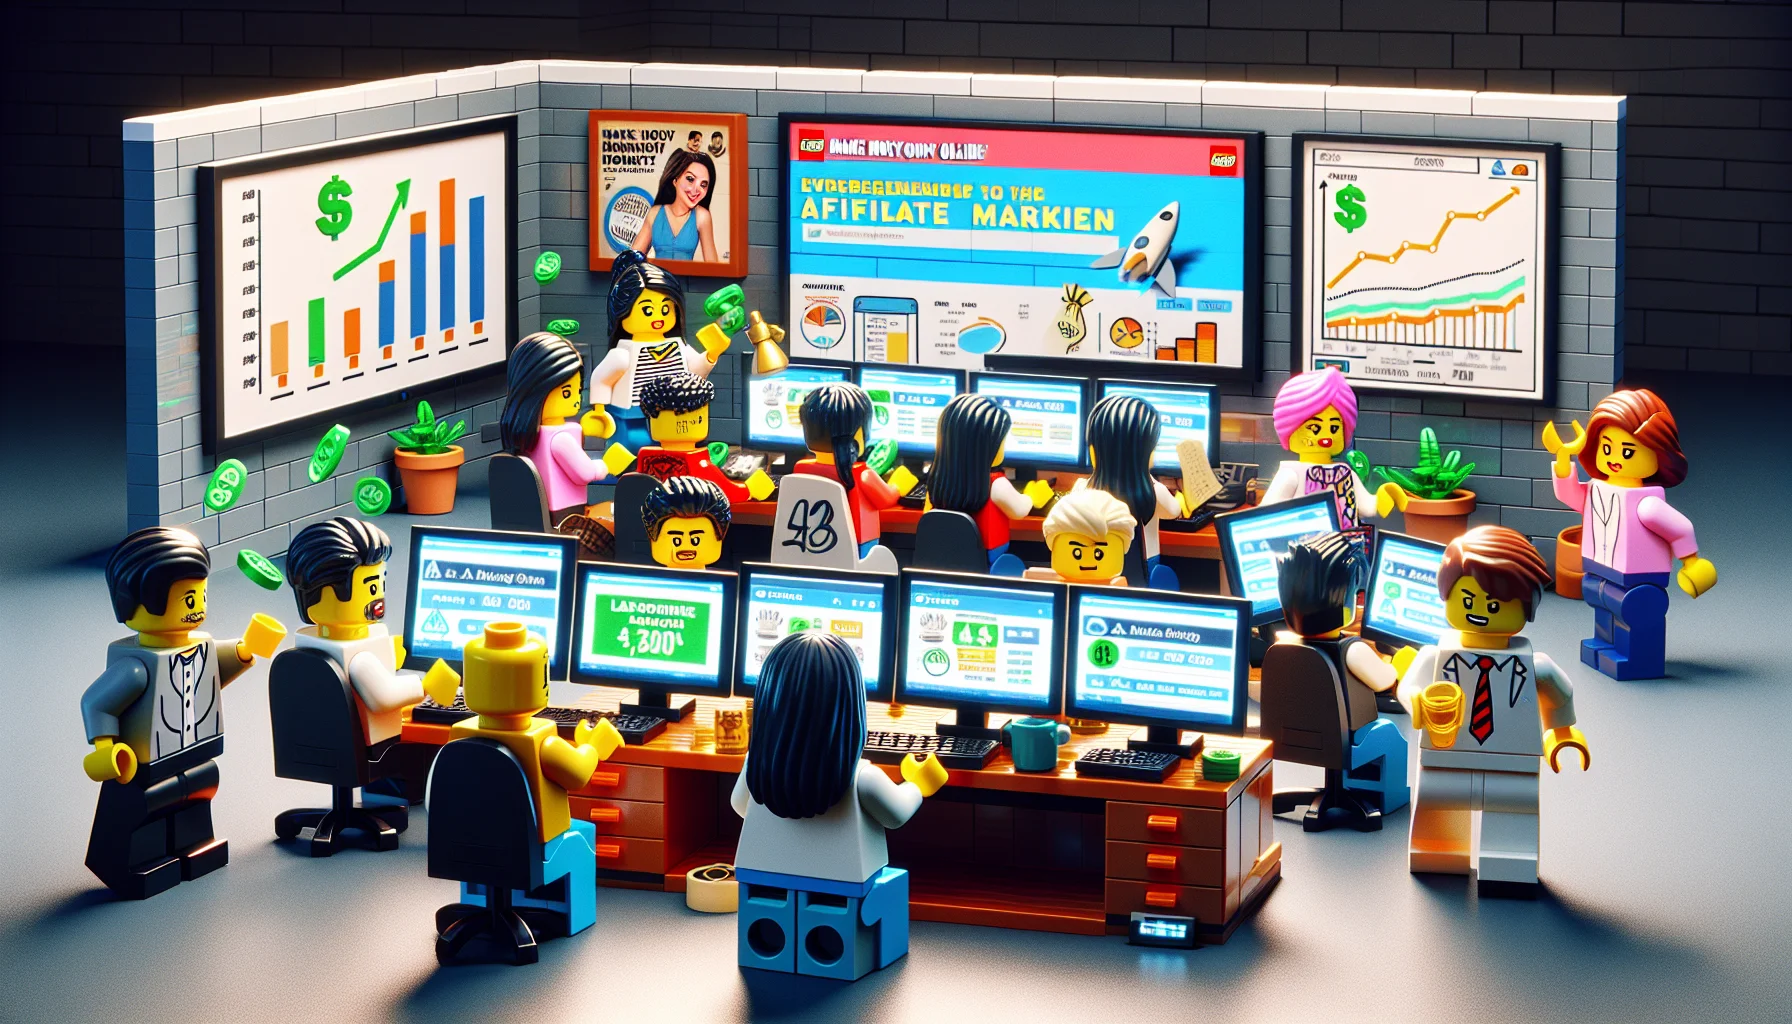 Design a playful, realistic scenario presenting LEGO mini-figures engaging in affiliate marketing. The scene takes place in a bustling home office. Several mini-figures, of different genders and descents, are diligently working around a computer desk displaying a bright computer screen. Charts of profits and LED displays with currency signs are around the room. One LEGO figure, an Hispanic woman, is presenting a webinar on a large flat-screen TV, while a Middle-Eastern man is operating a computer showcasing an attractive 'Make Money Online' website. Delve into the imagery of online entrepreneurship using LEGO elements, while maintaining a sense of humor and creativity.